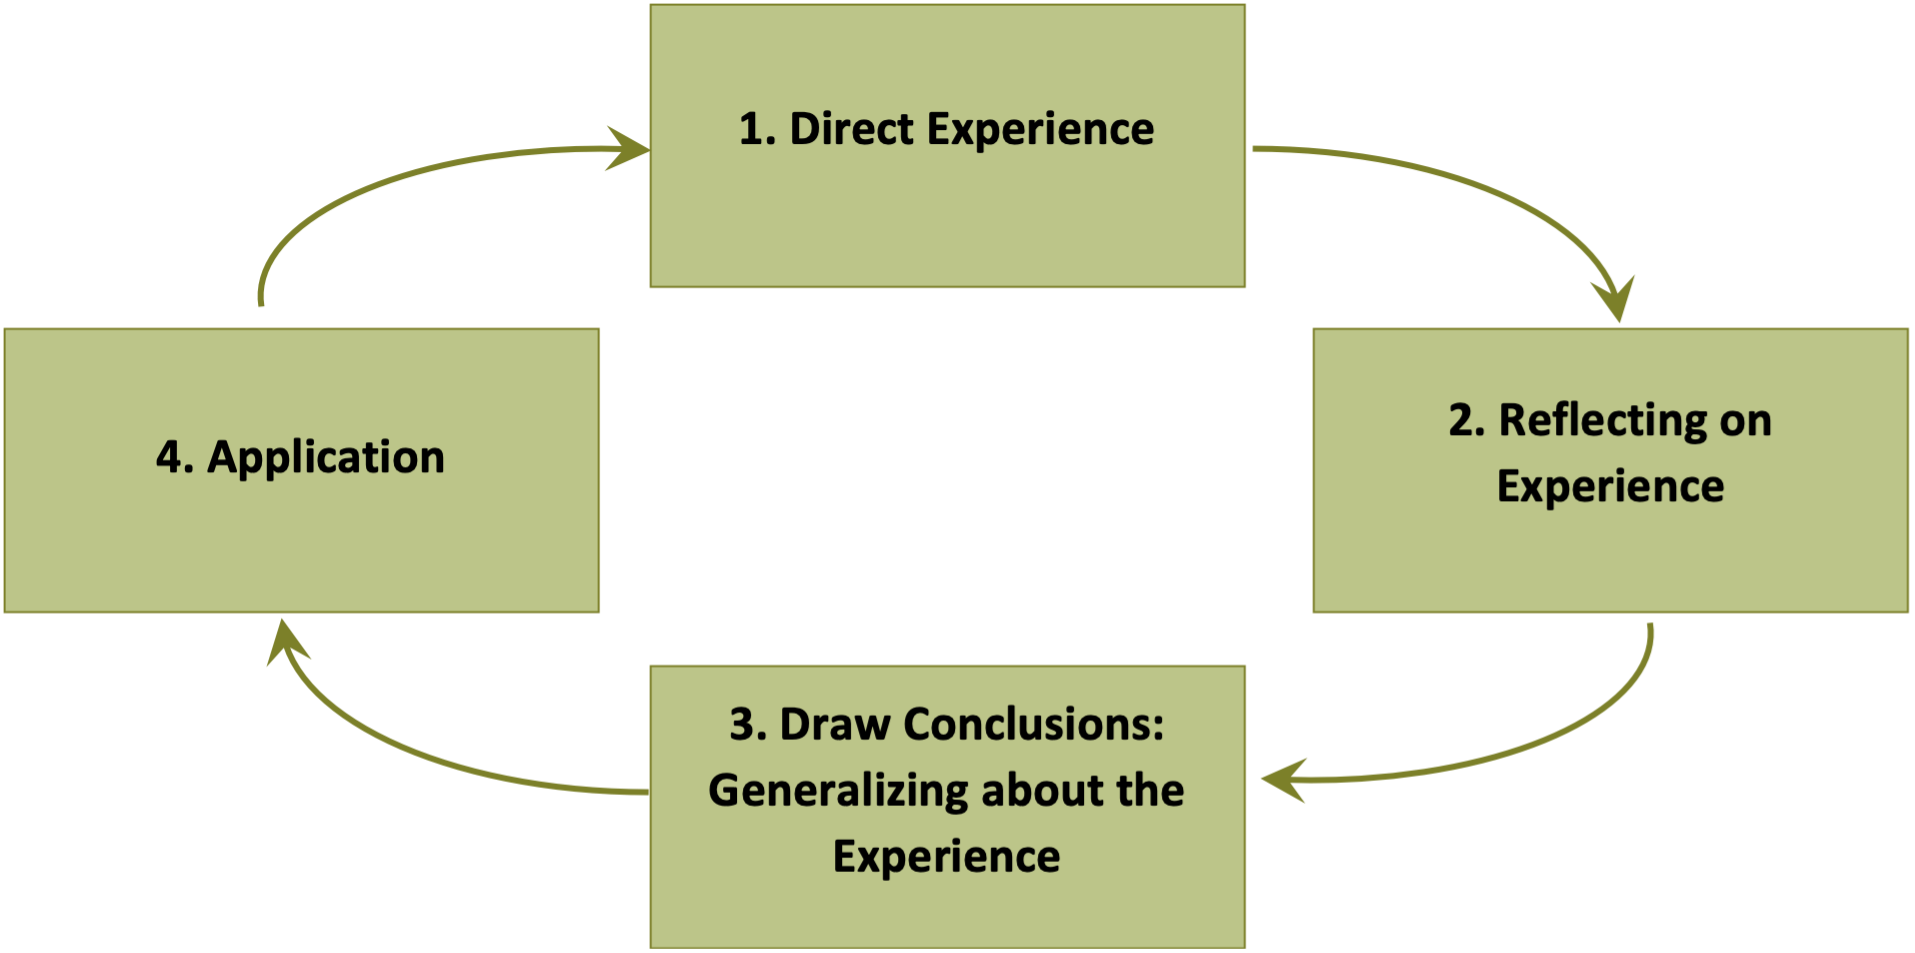 Figure 42: Reflection and Learning Process [7]